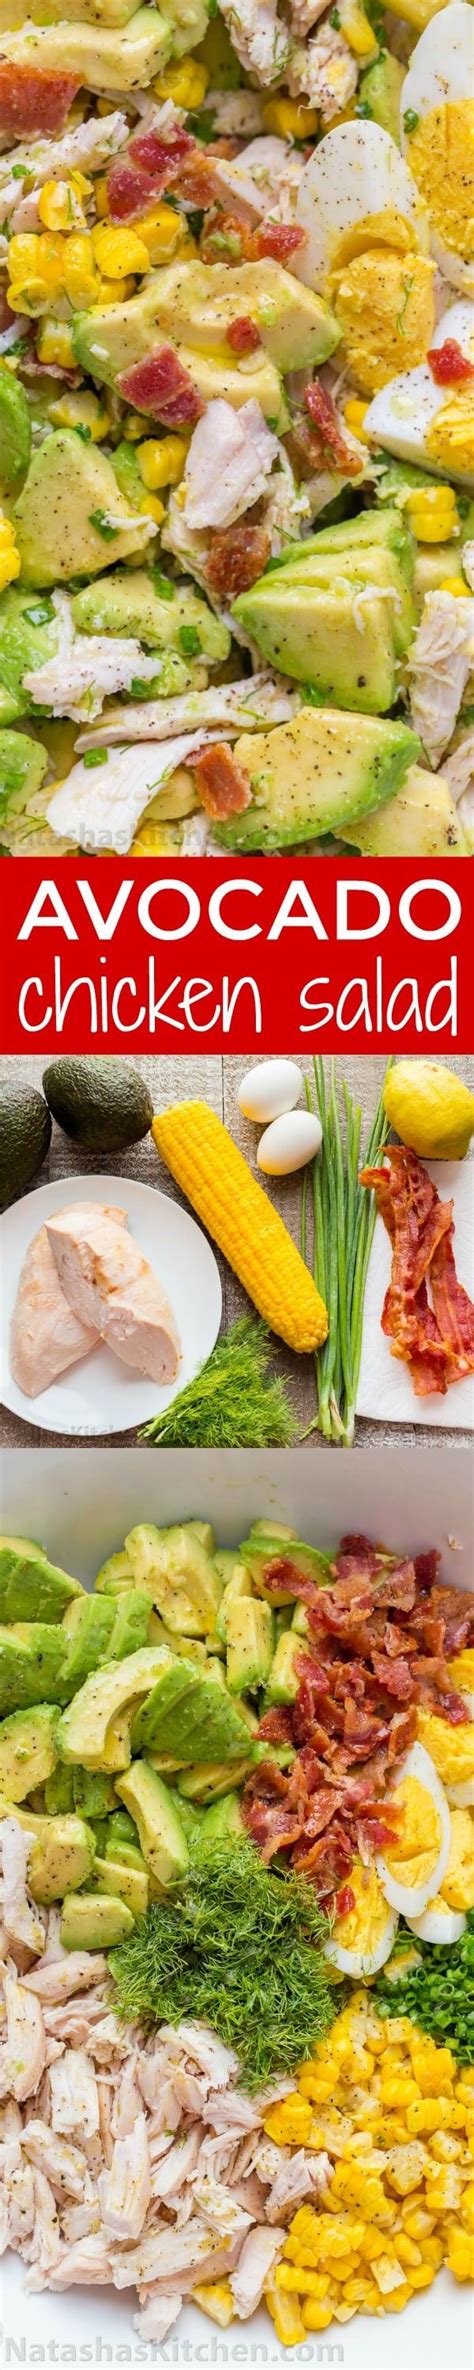 The sweet and tangy honey vinaigrette couldn't be easier! Avocado Chicken Salad Recipe (VIDEO) - NatashasKitchen.com ...